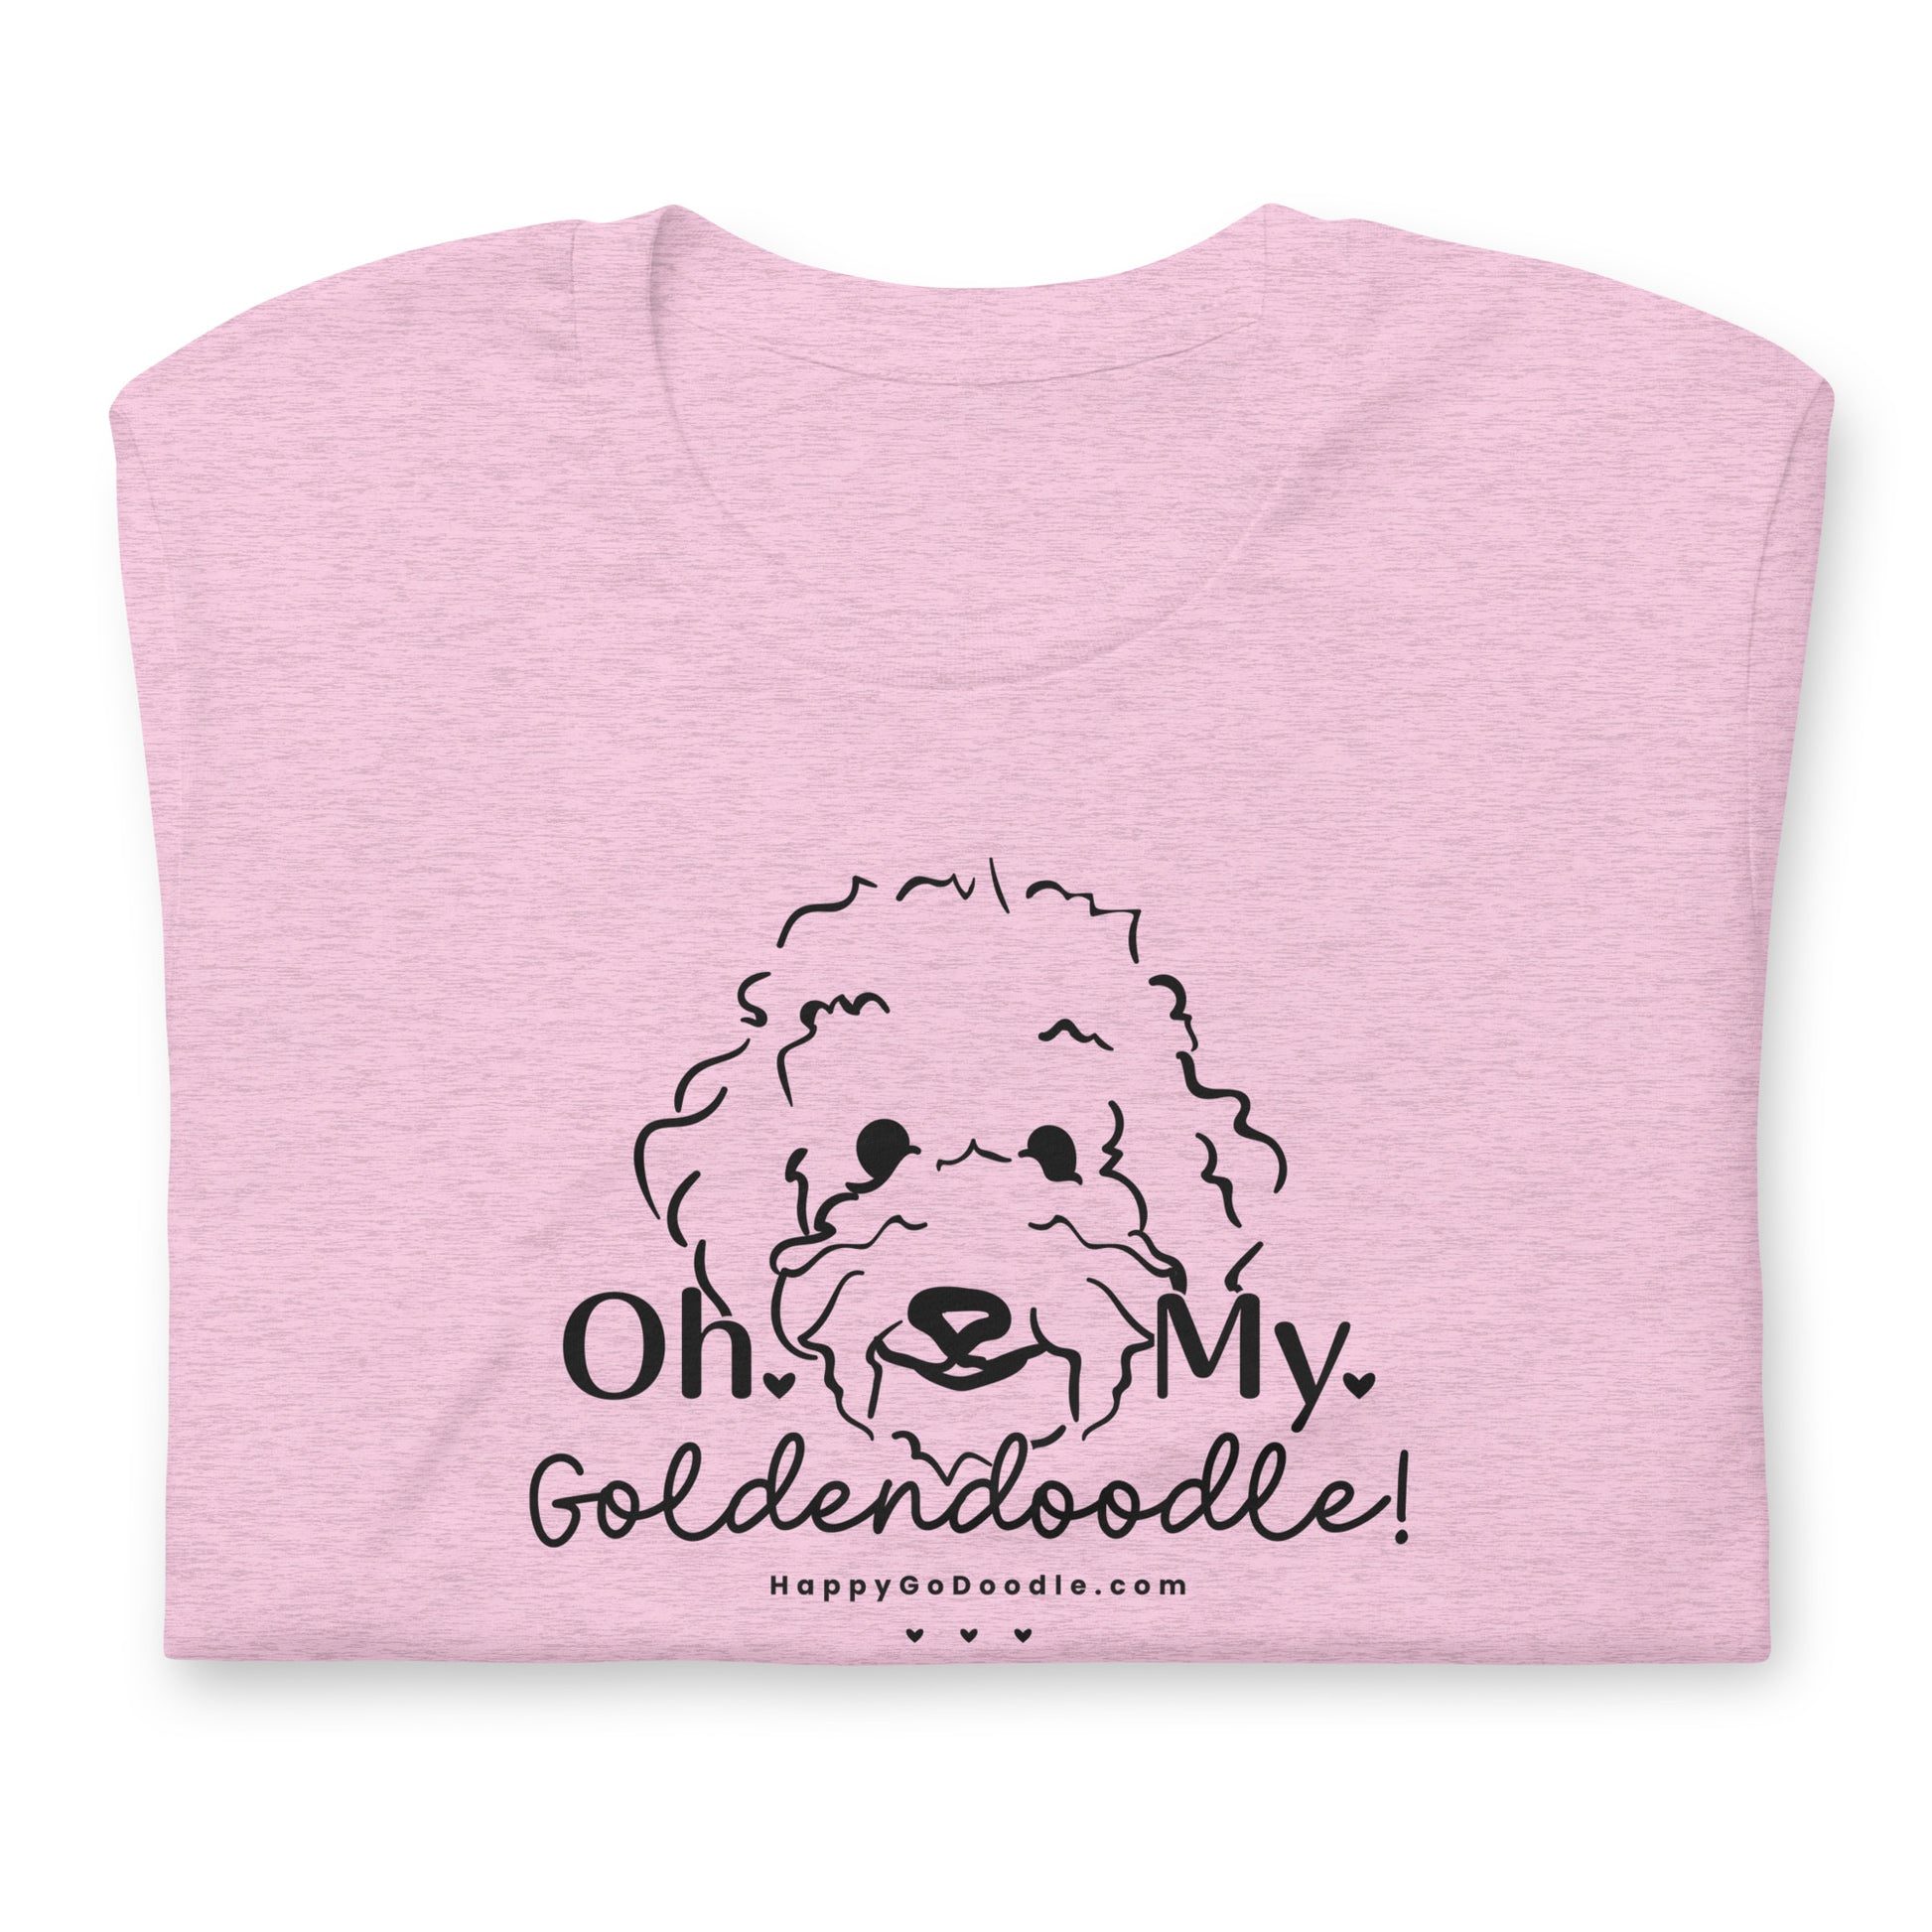 Goldendoodle t-shirt with Goldendoodle face and words "Oh My Goldendoodle" in light pink color